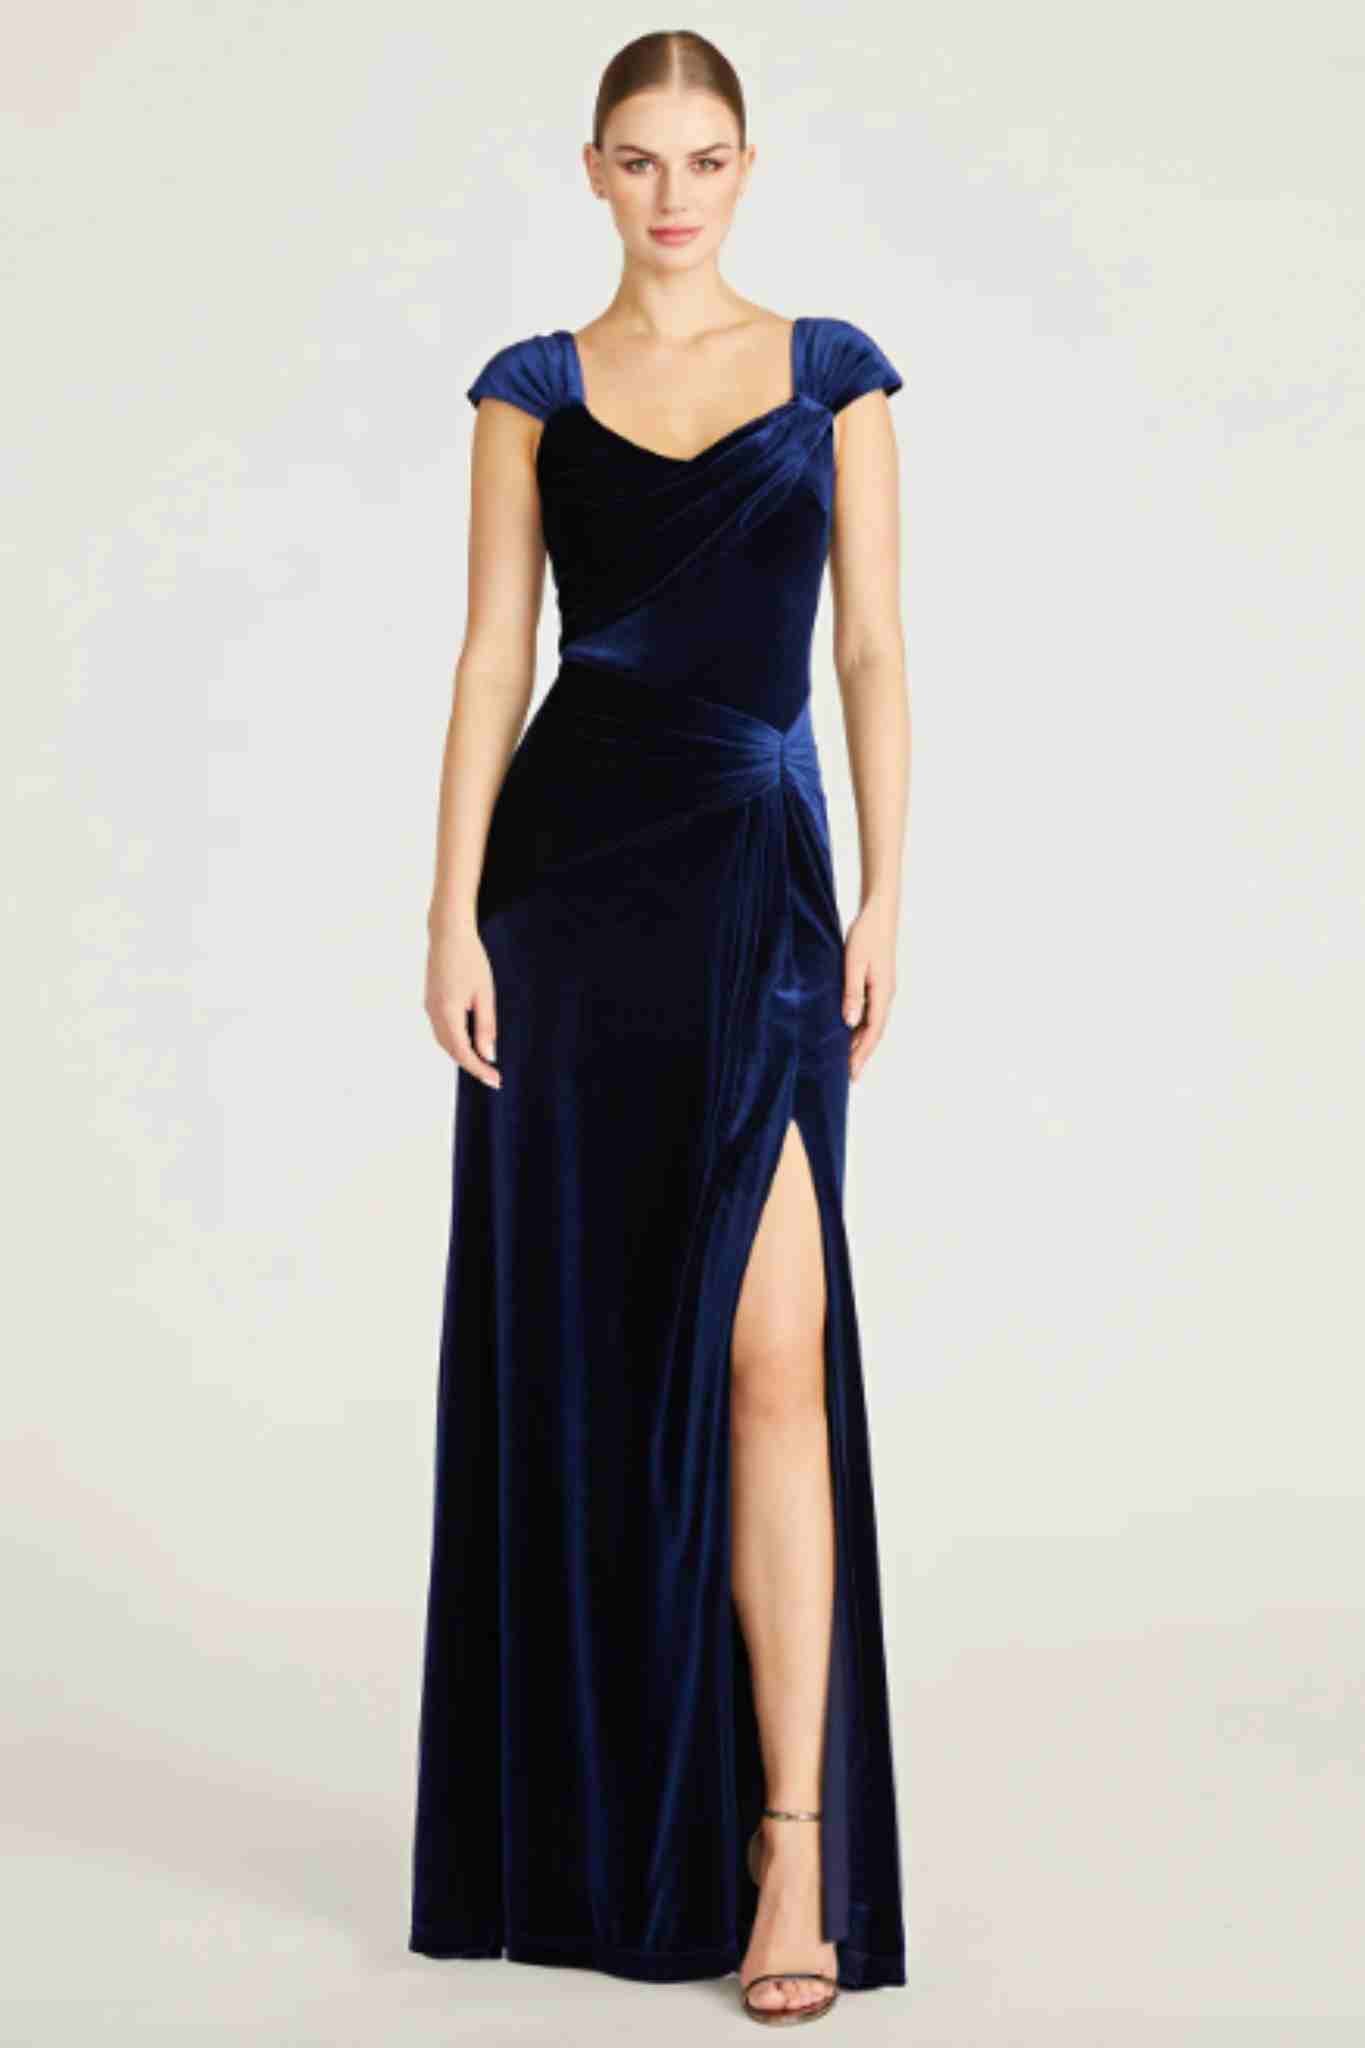 Lou Draped Gown by Theia Couture - RENTAL